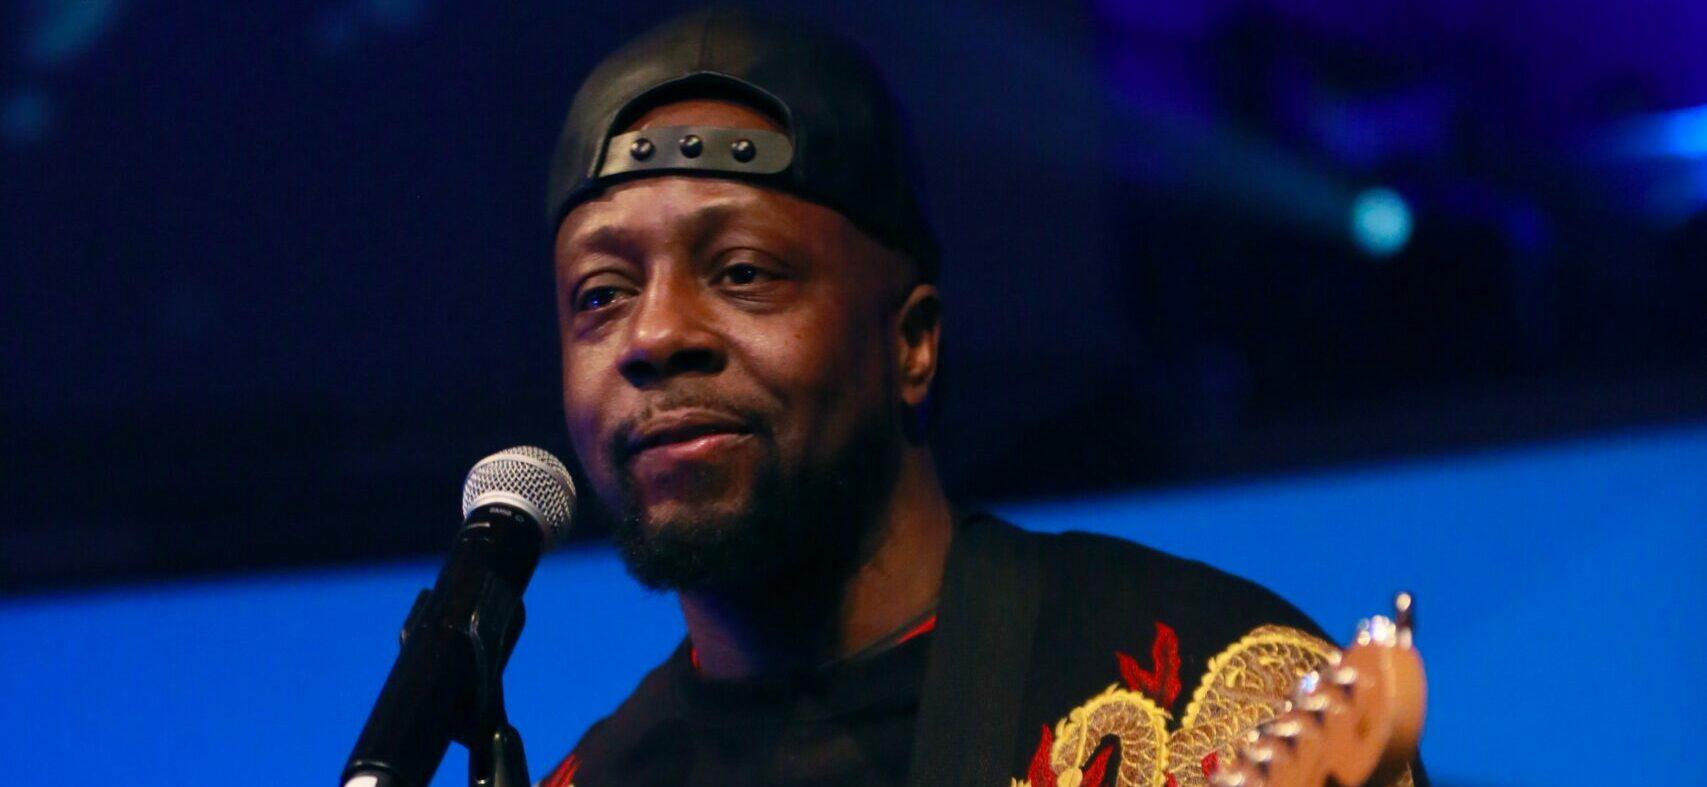 Wyclef Jean performs at the annual Salesforce big party